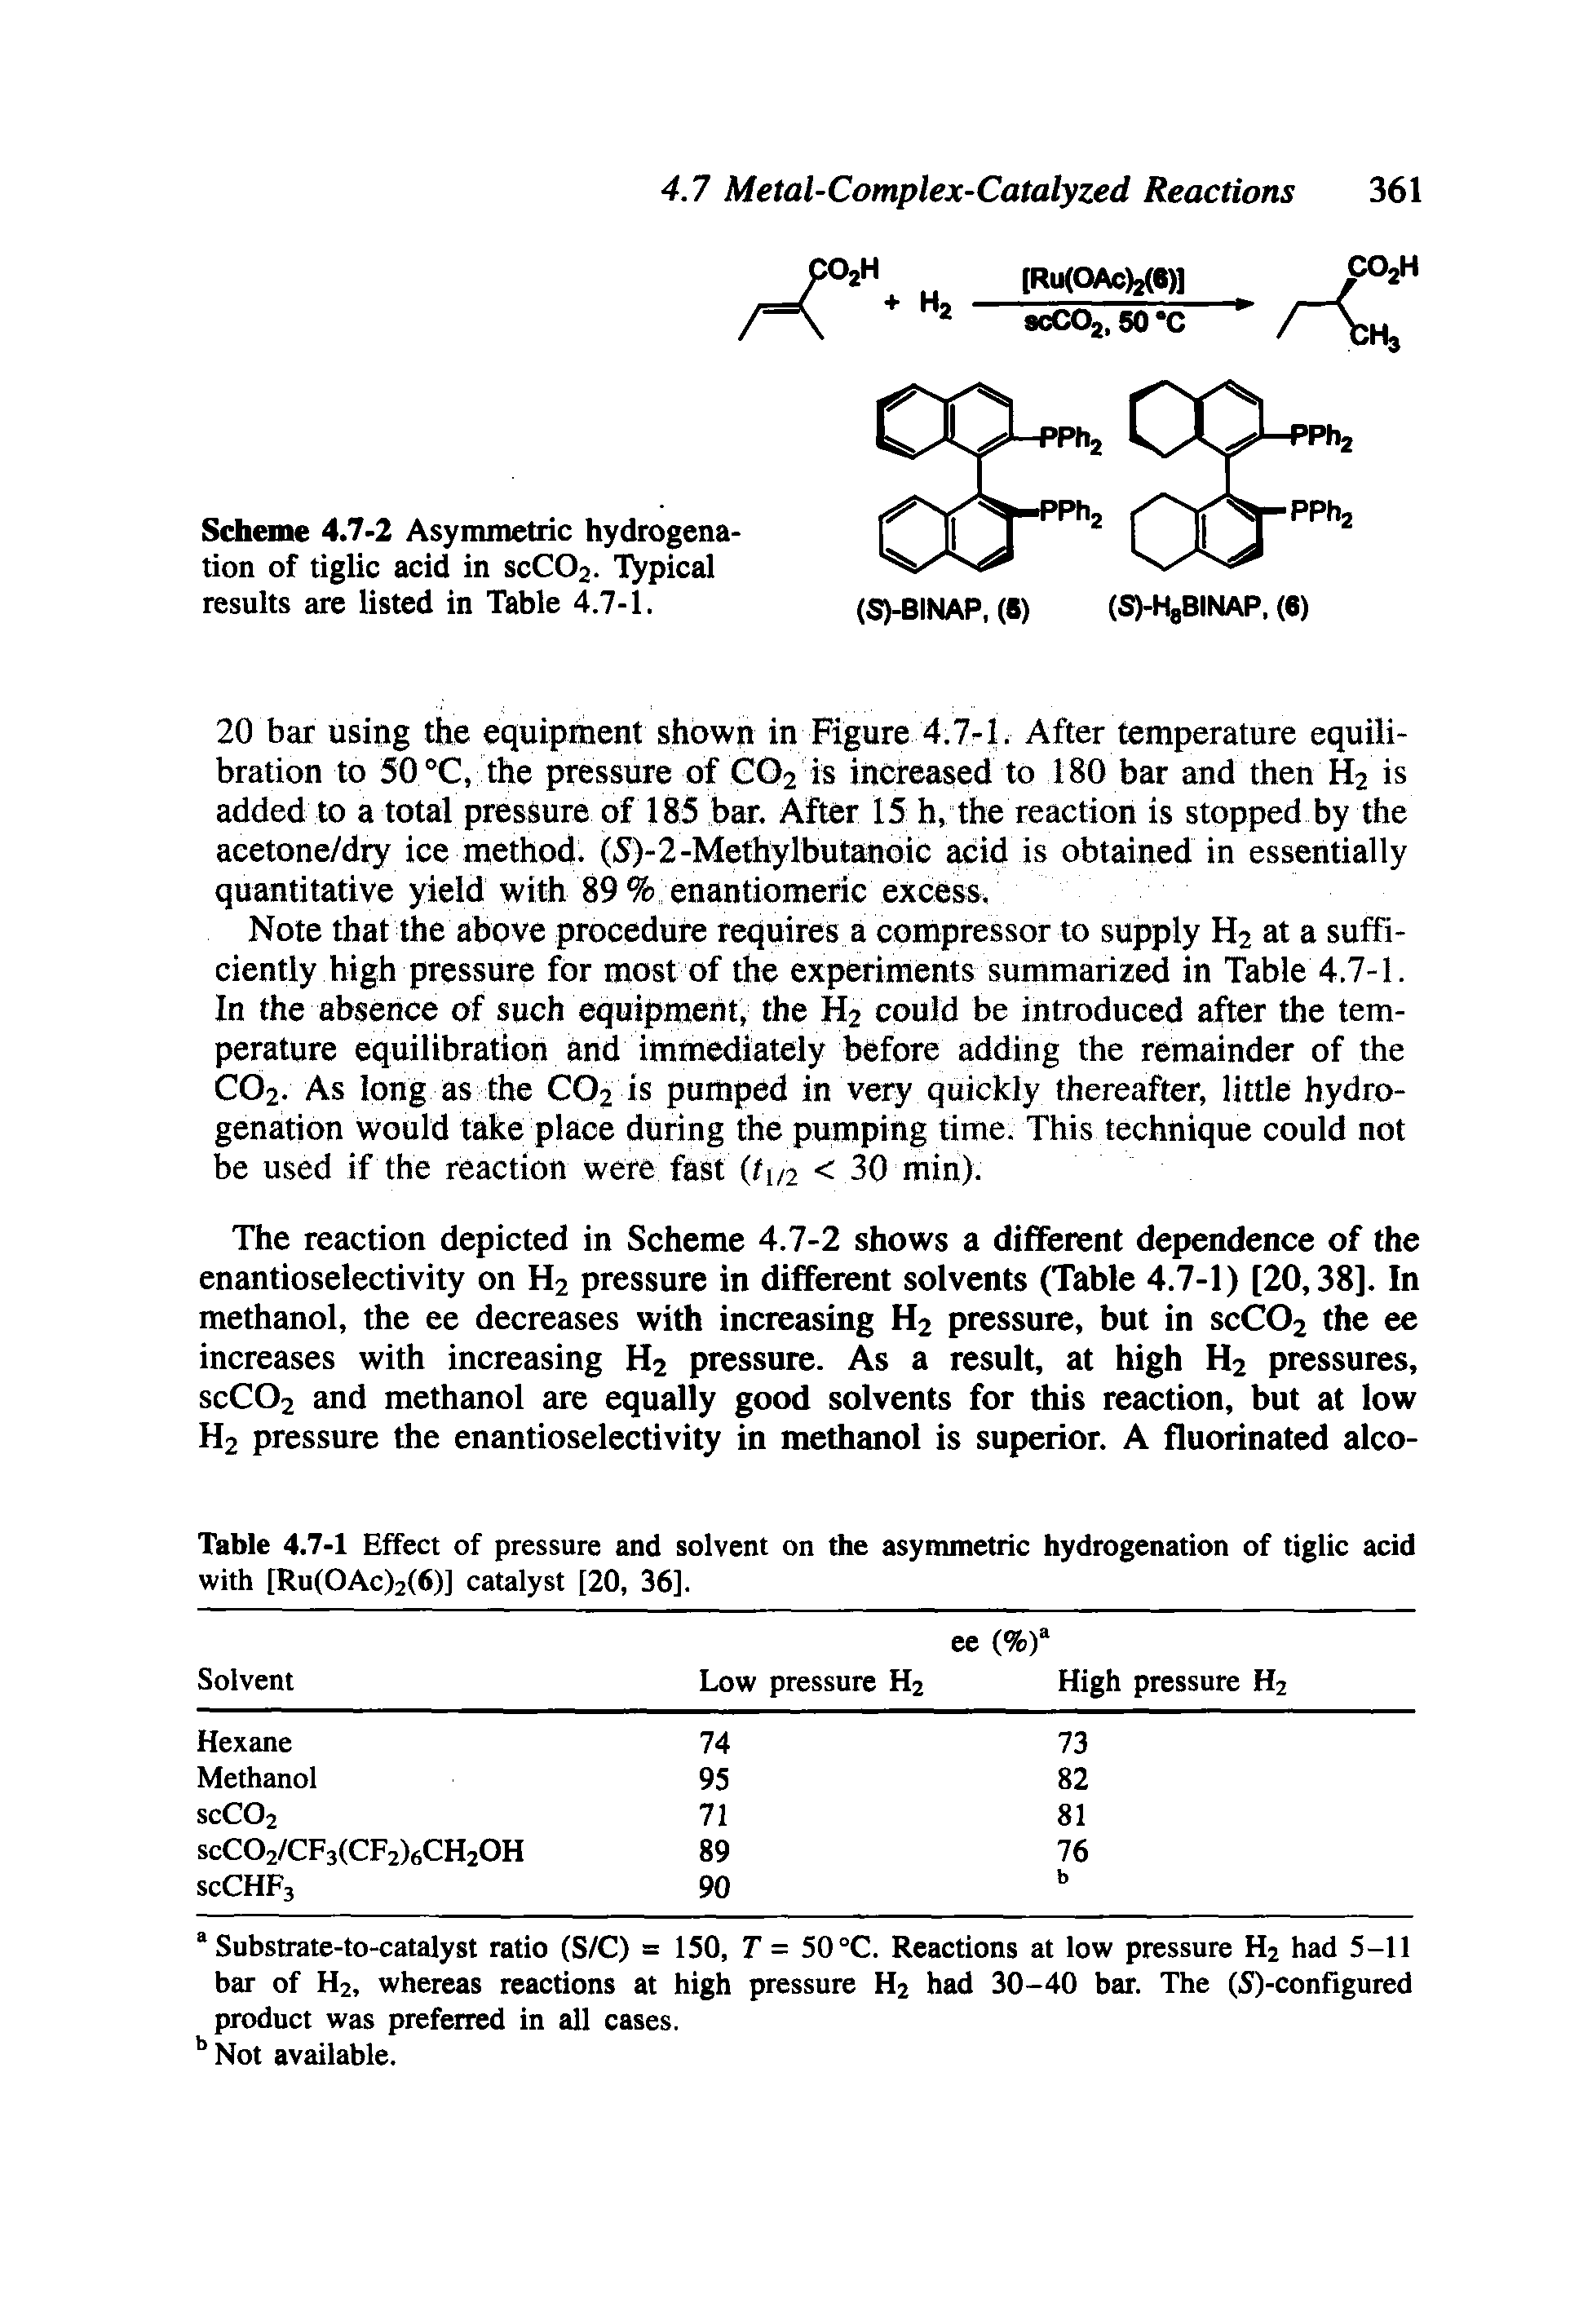 Table 4.7-1 Effect of pressure and solvent on the asymmetric hydrogenation of tiglic acid with [Ru(OAc)2(6)J catalyst [20, 36].